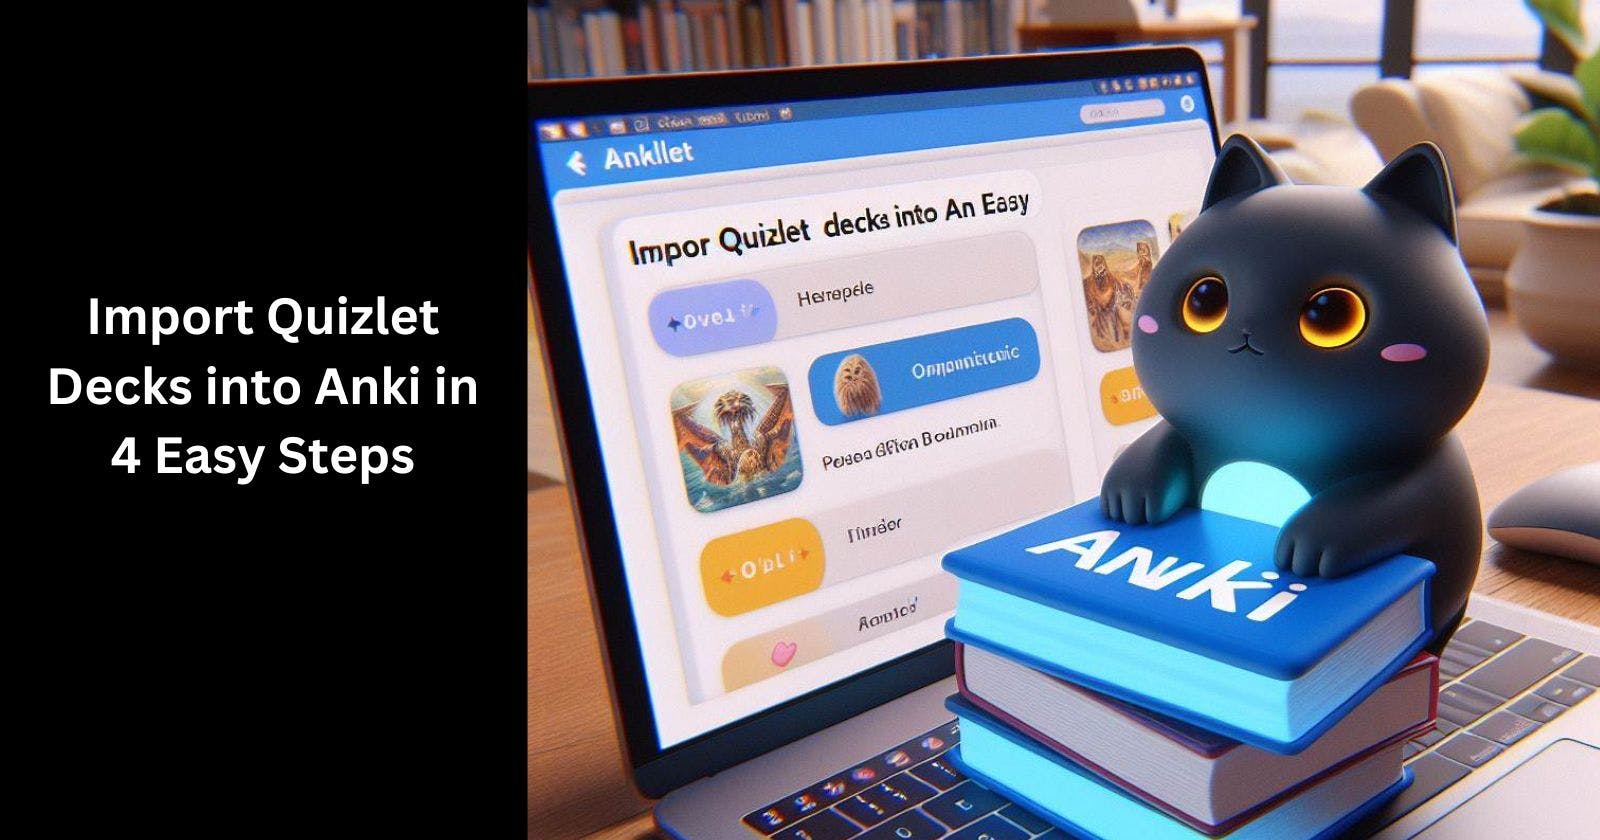 Import Quizlet Decks into Anki in 4 Easy Steps